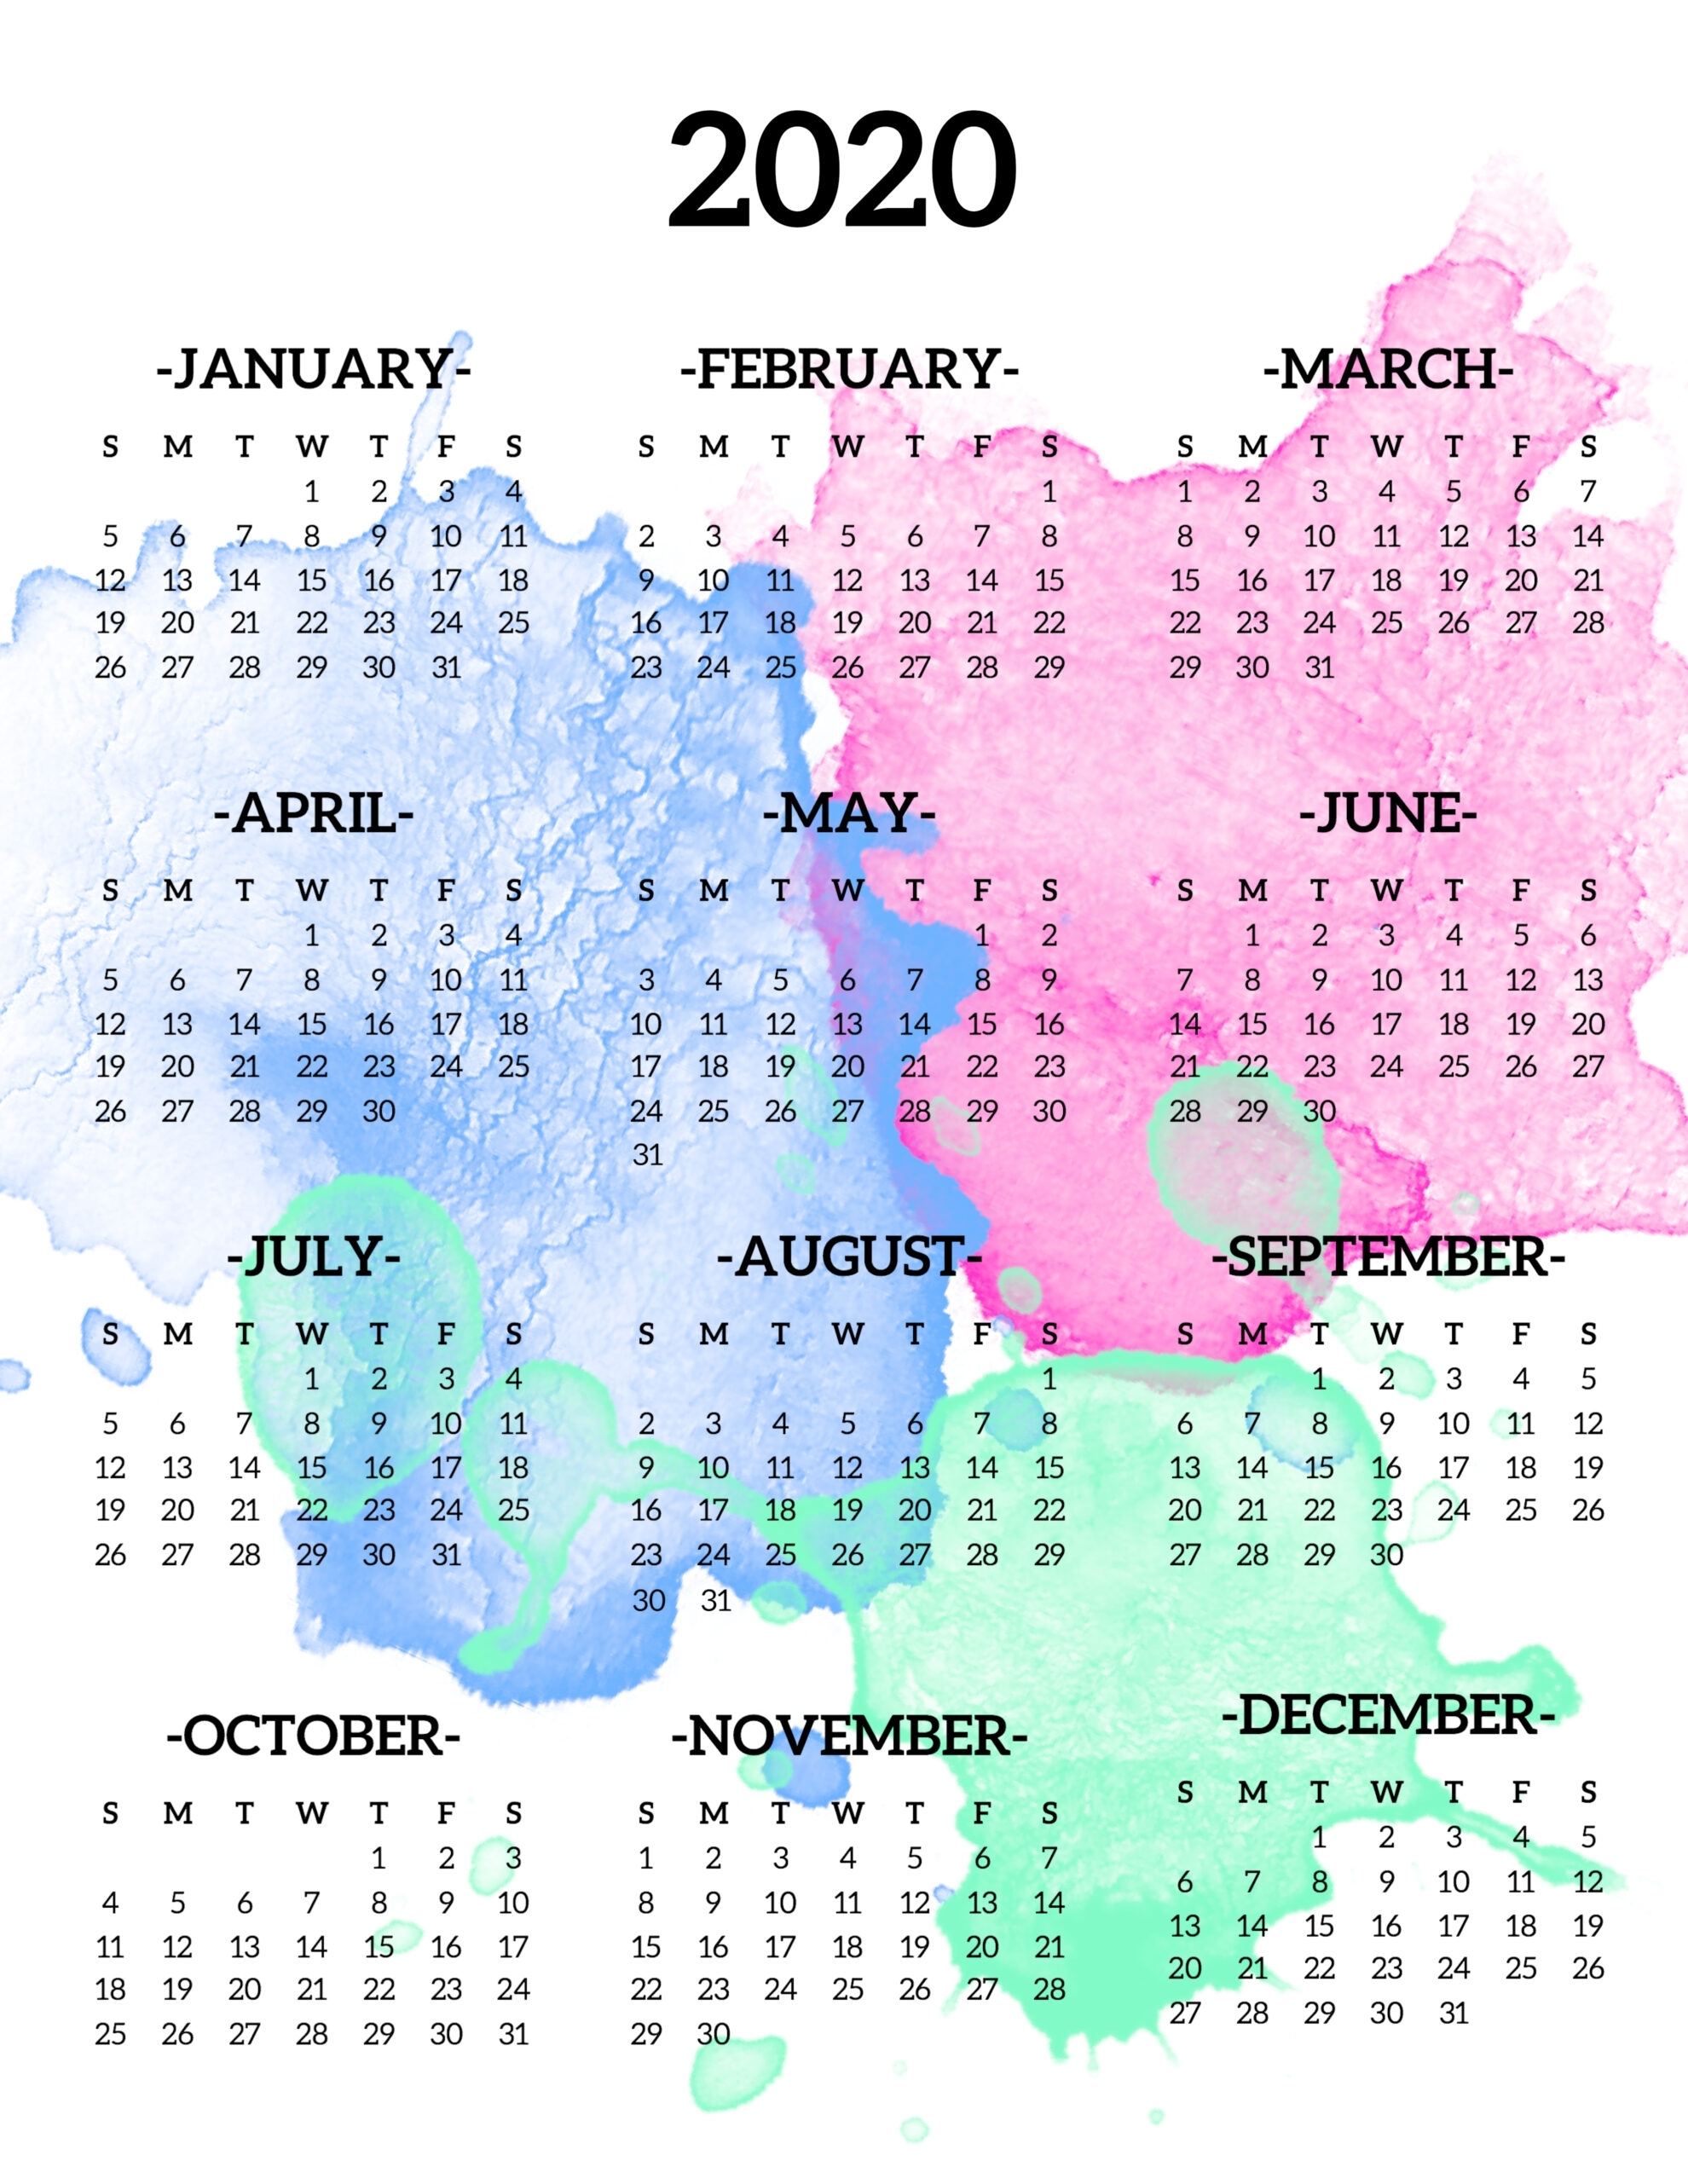 Calendar 2020 Printable One Page - Paper Trail Design inside A Year At A Glance 2020